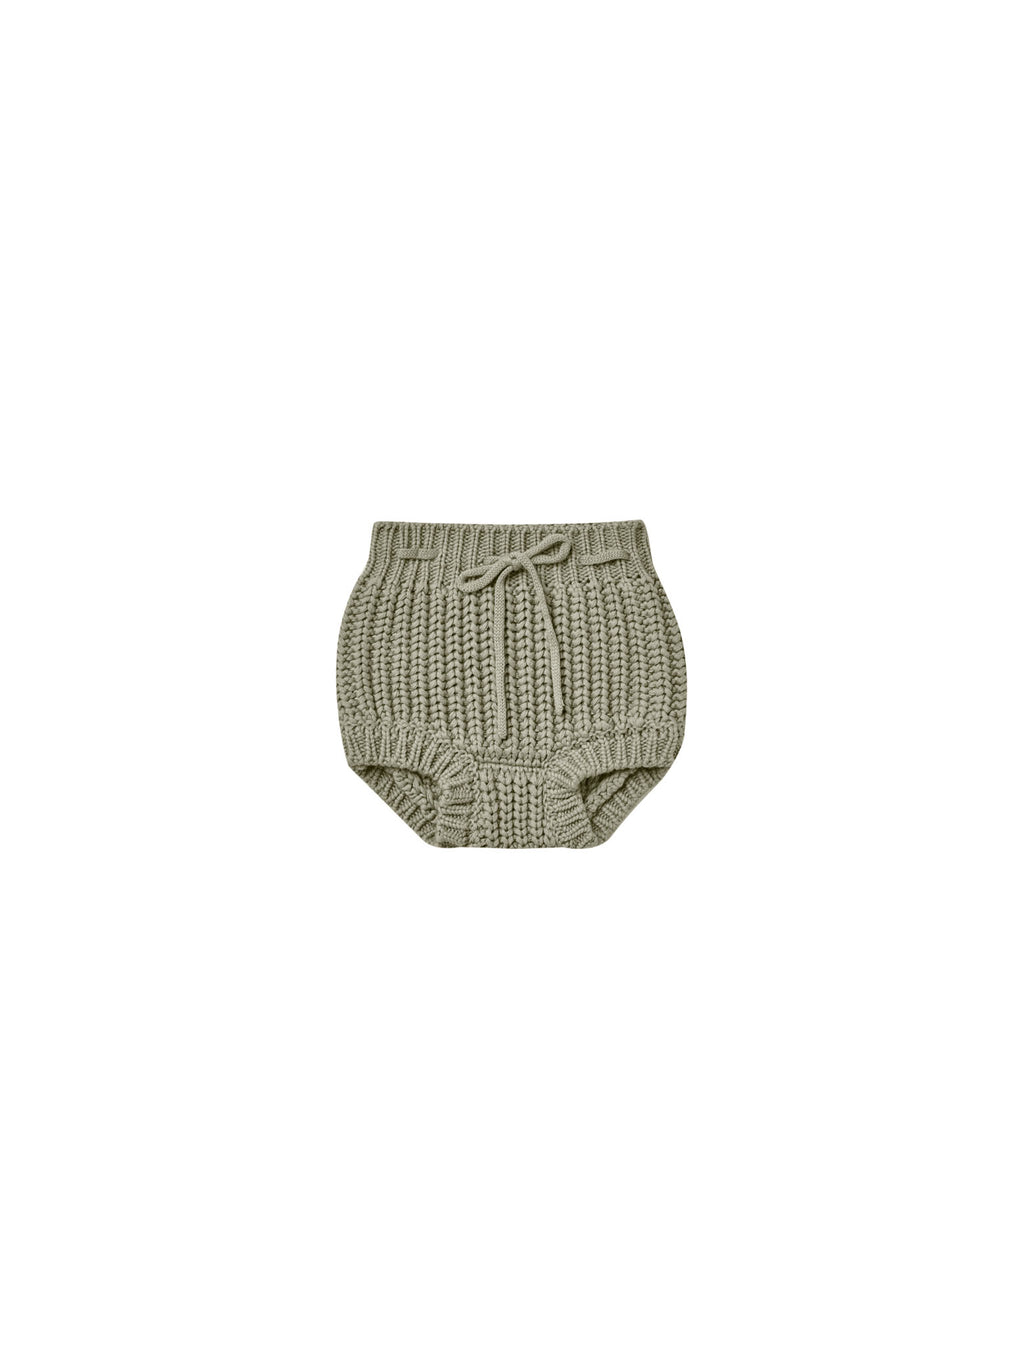 Quincy Mae Knit Tie Bloomer - Basil